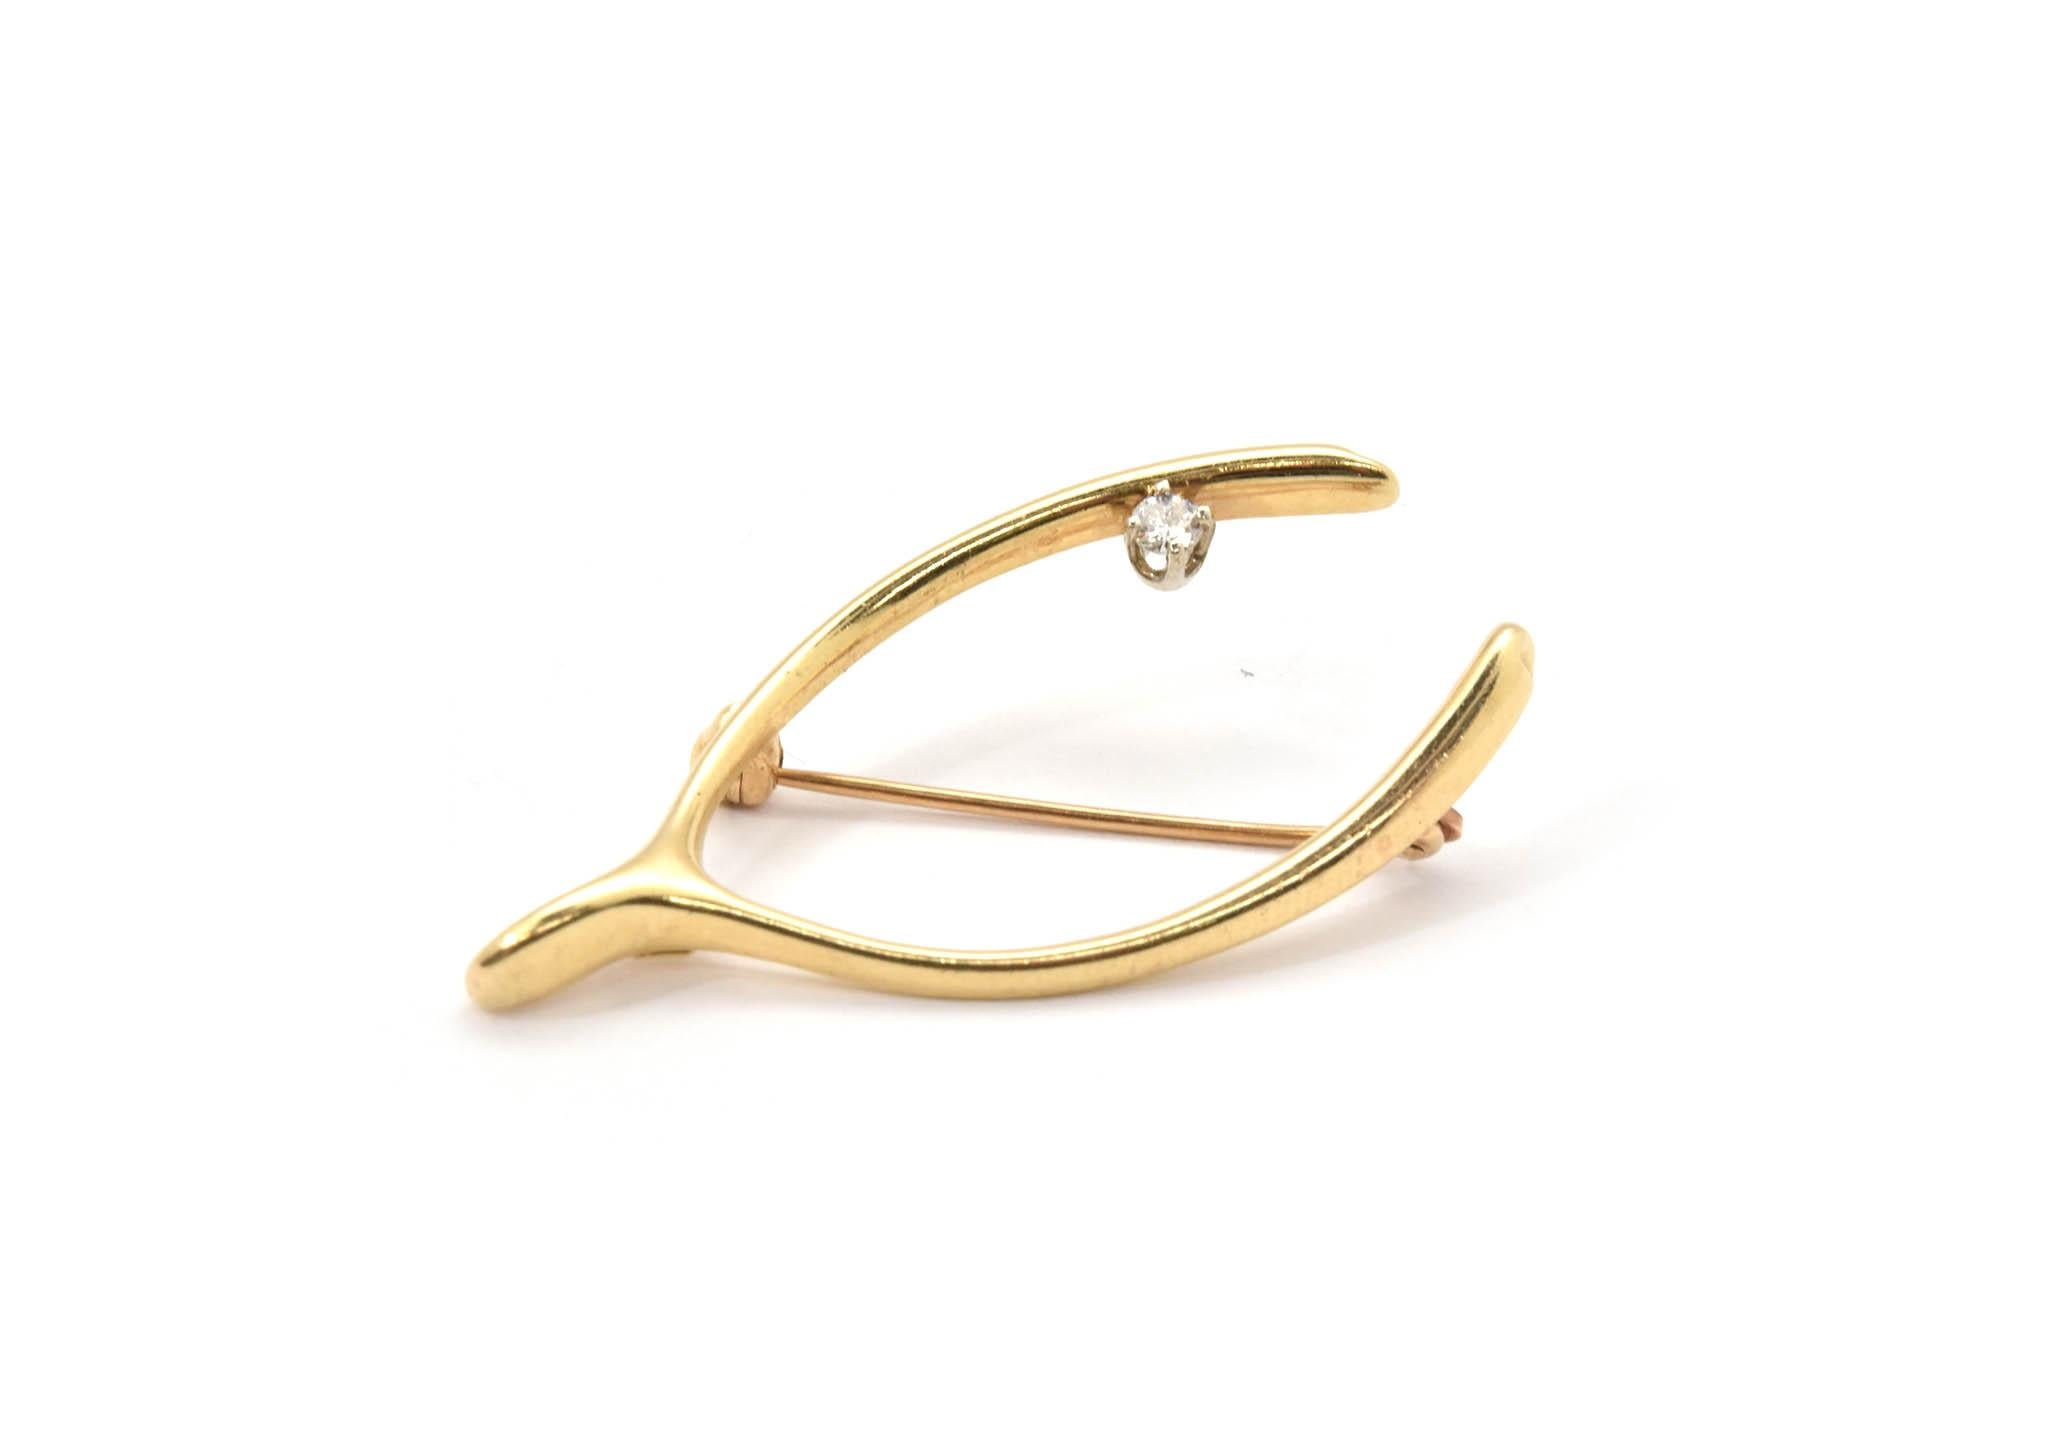 This timeless, Tiffany & Co pin is from the 1950’s and is no longer in production! The wishbone pin is made in 14k yellow gold and prong set with a 0.07ct round diamond! The Tiffany diamond quality is a G in color and VS in clarity. The pin measures